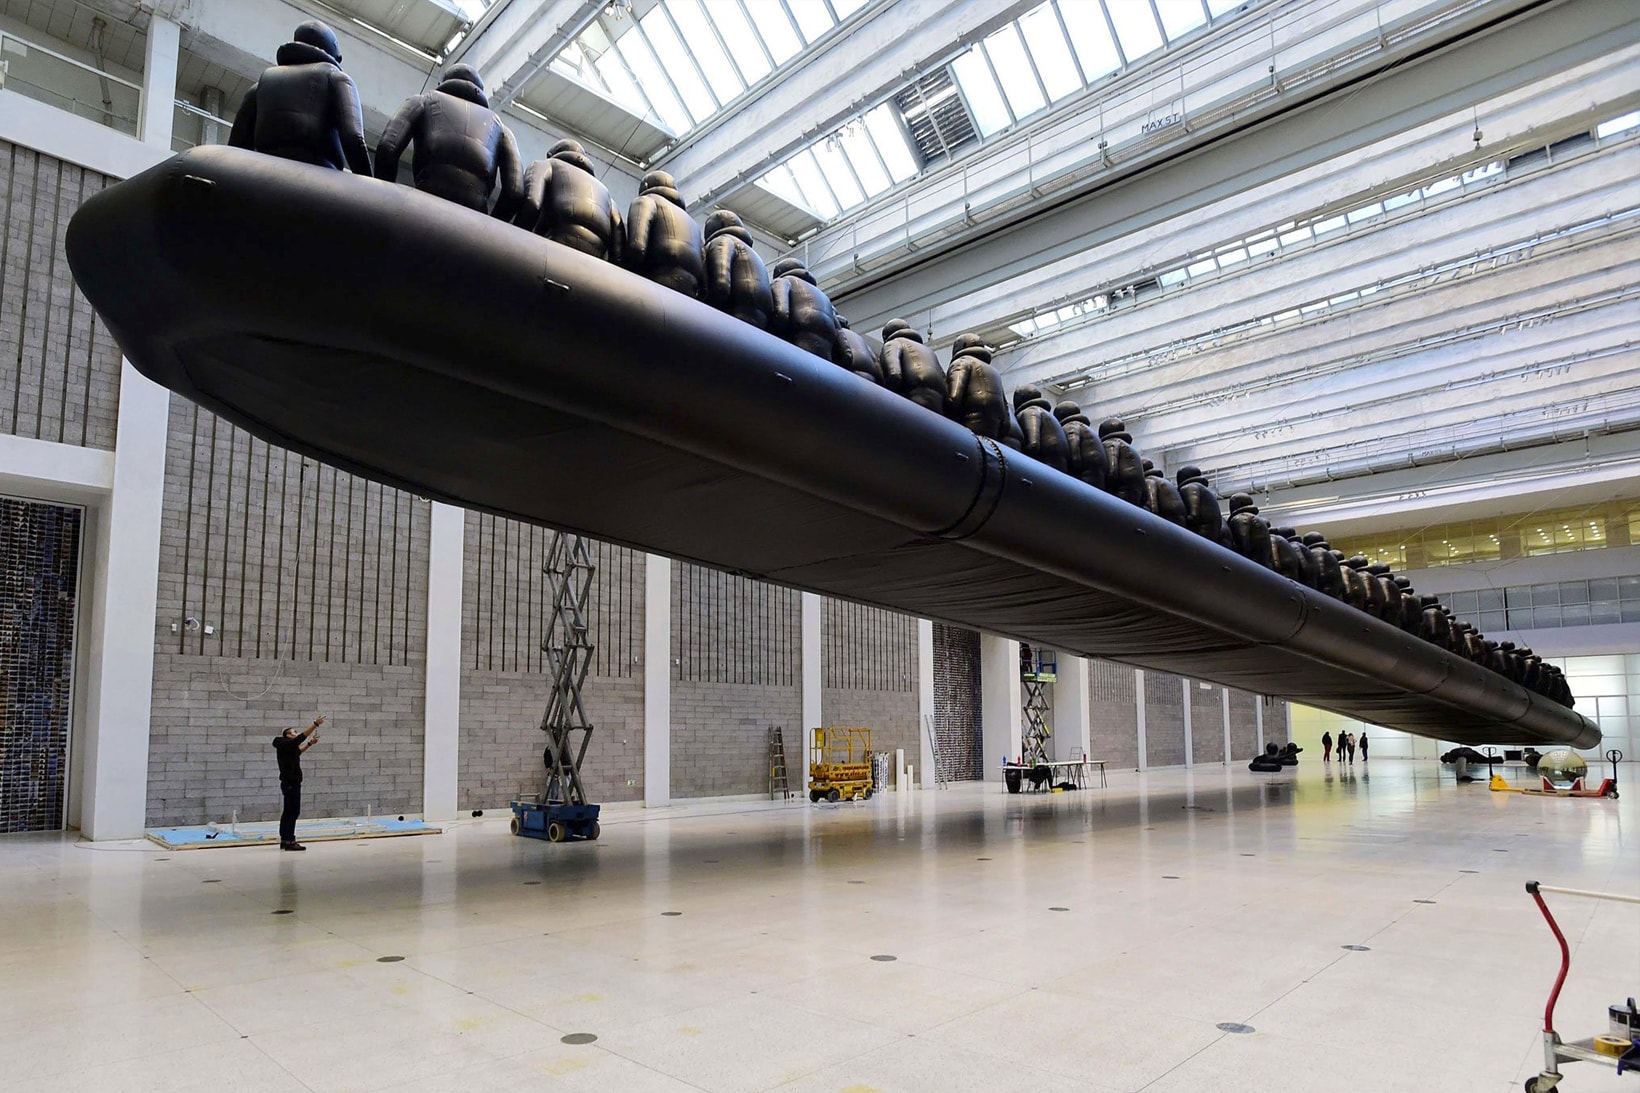 Ai Weiwei's Refugee Boat Is His Largest Work Yet